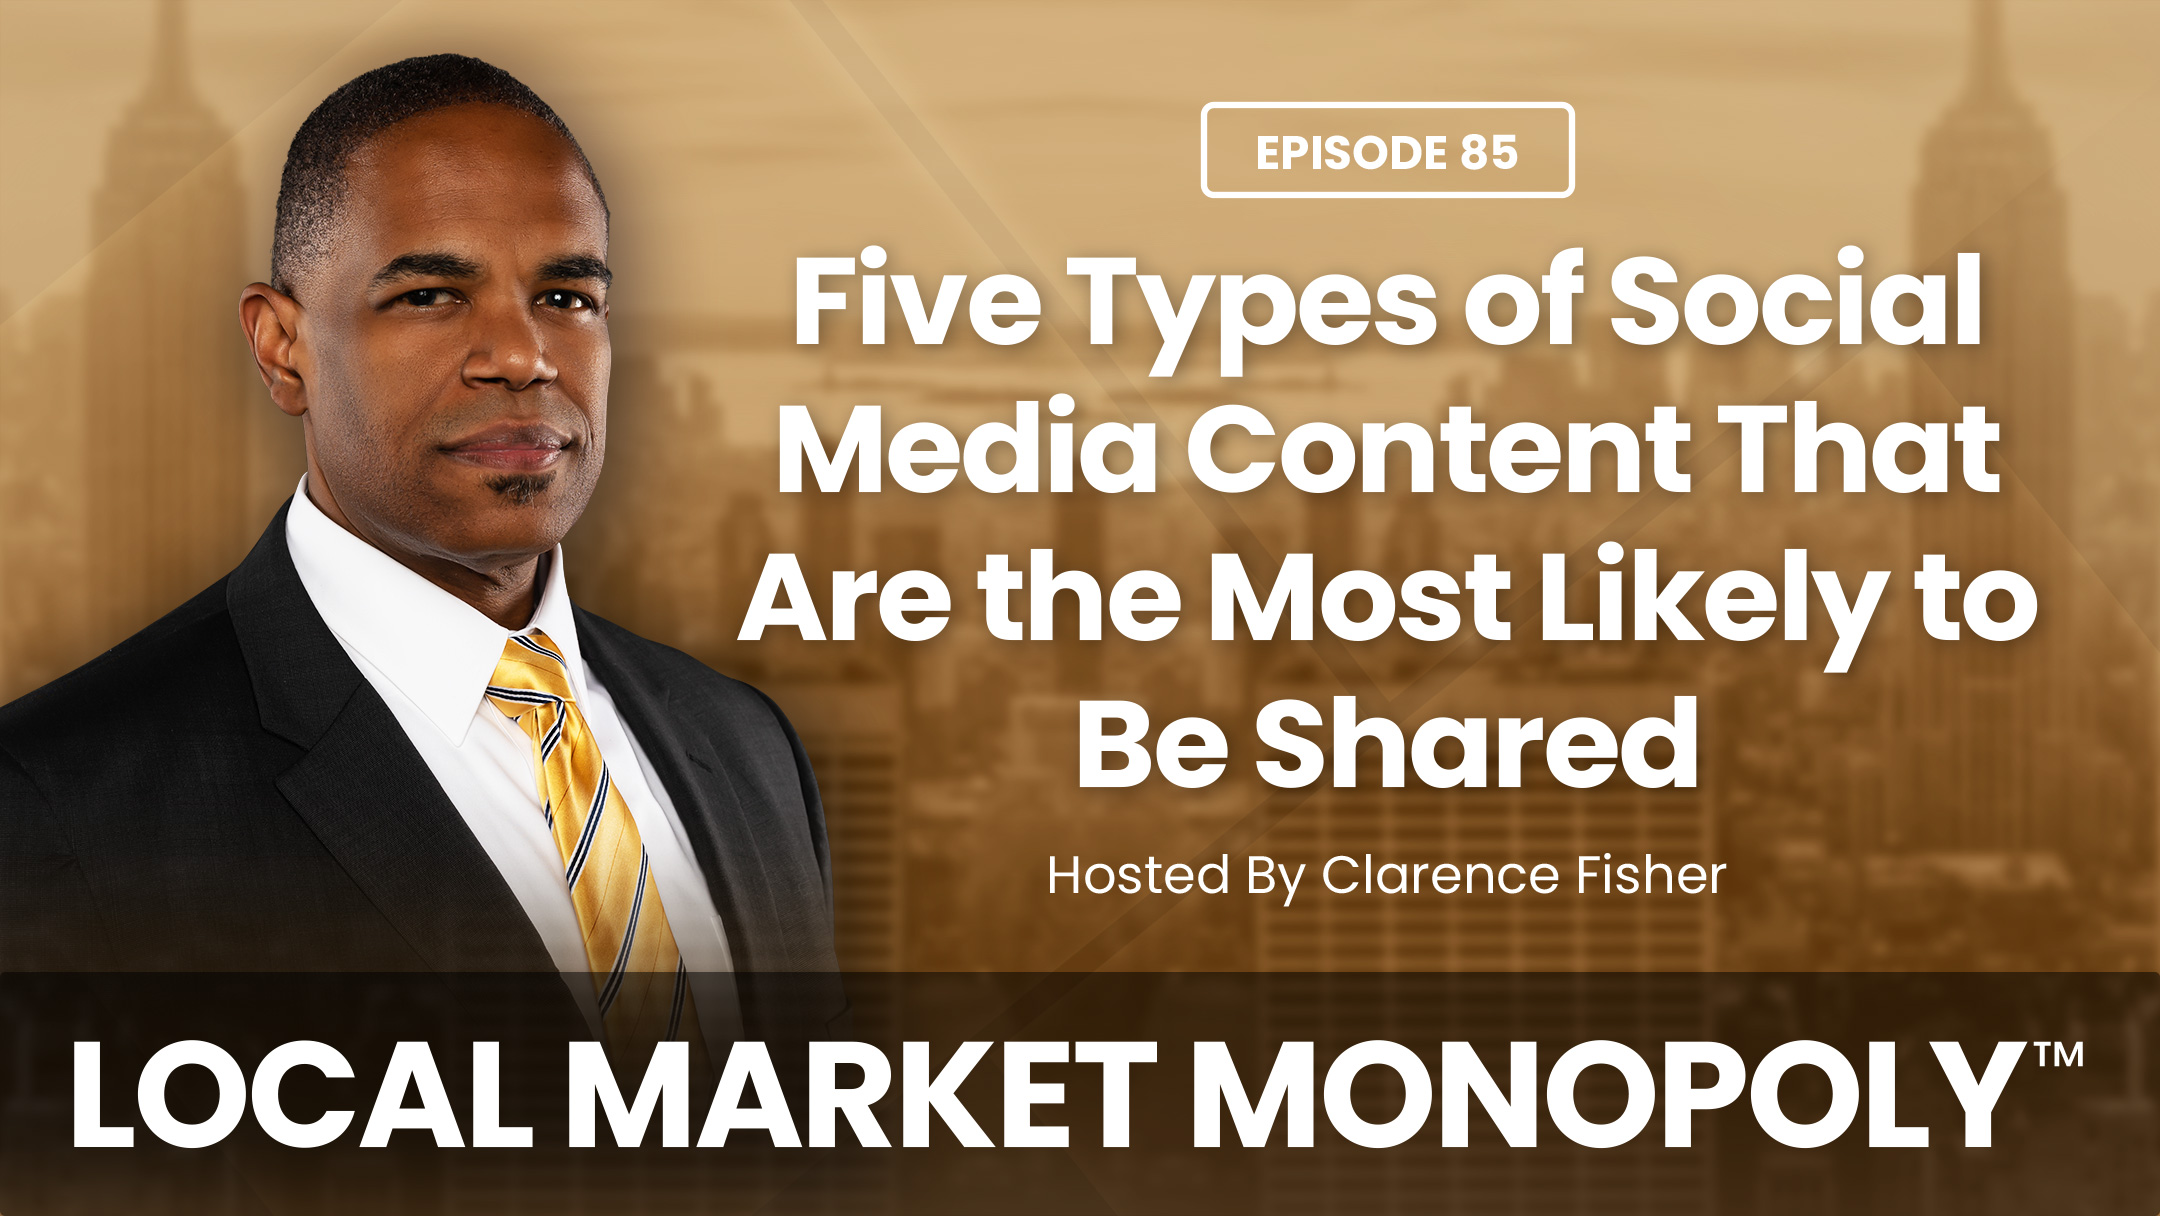 Five Types of Social Media Content That Are the Most Likely to Be Shared